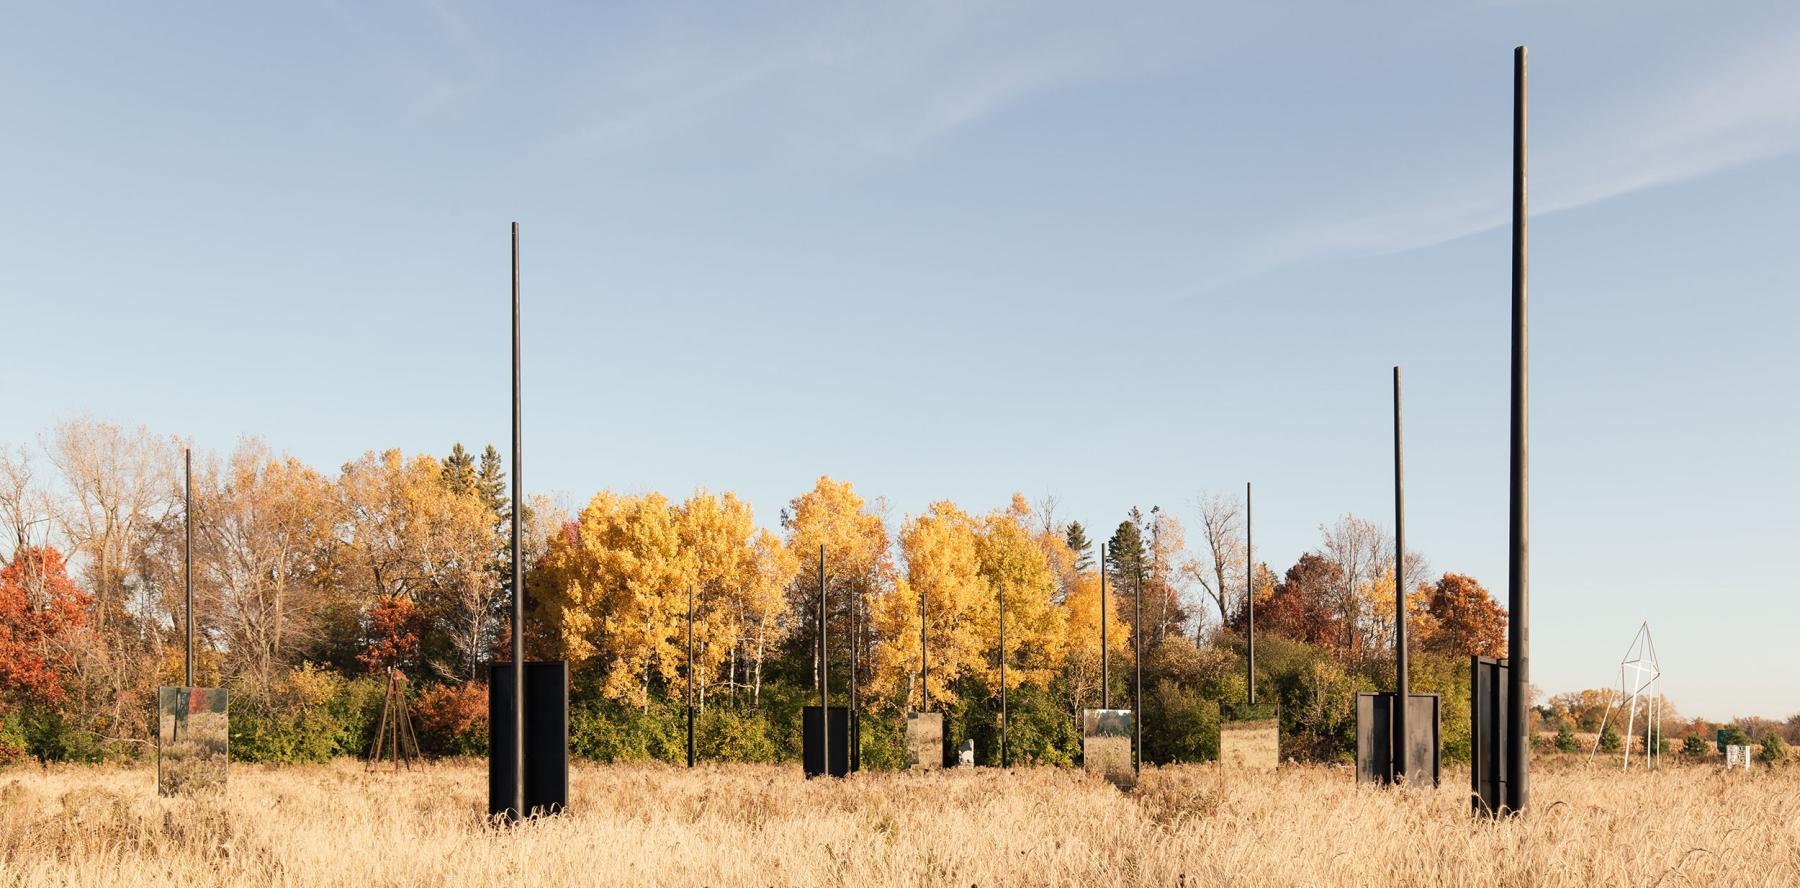 Upright poles and rectangular blocks in a field of dry grass with trees behind.